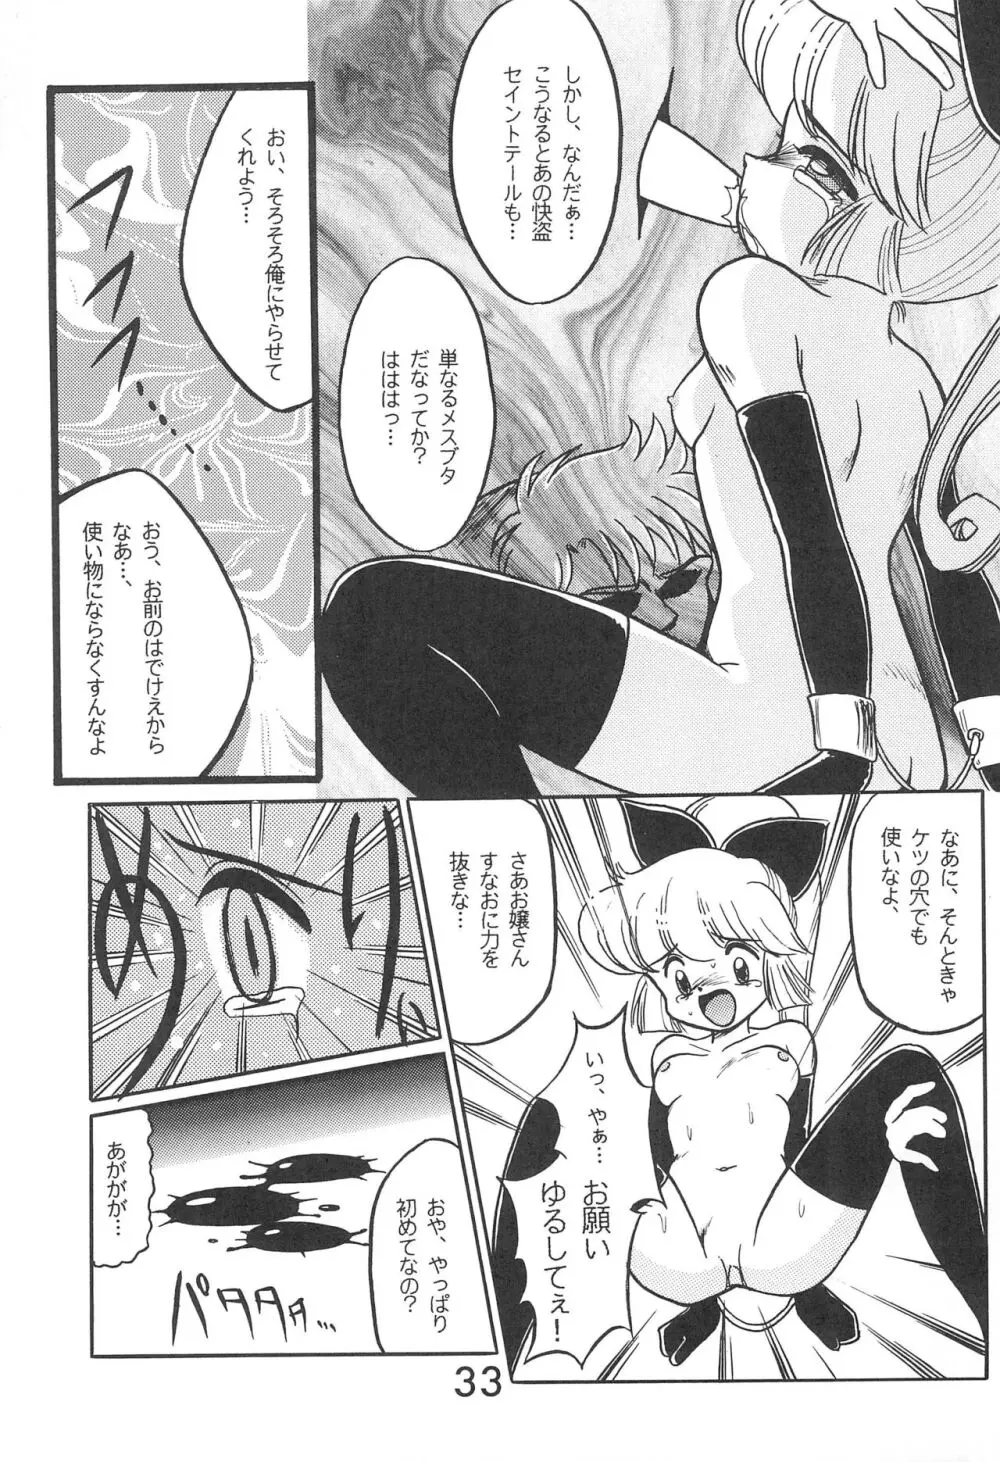 Fun House 9th Chame! - page33